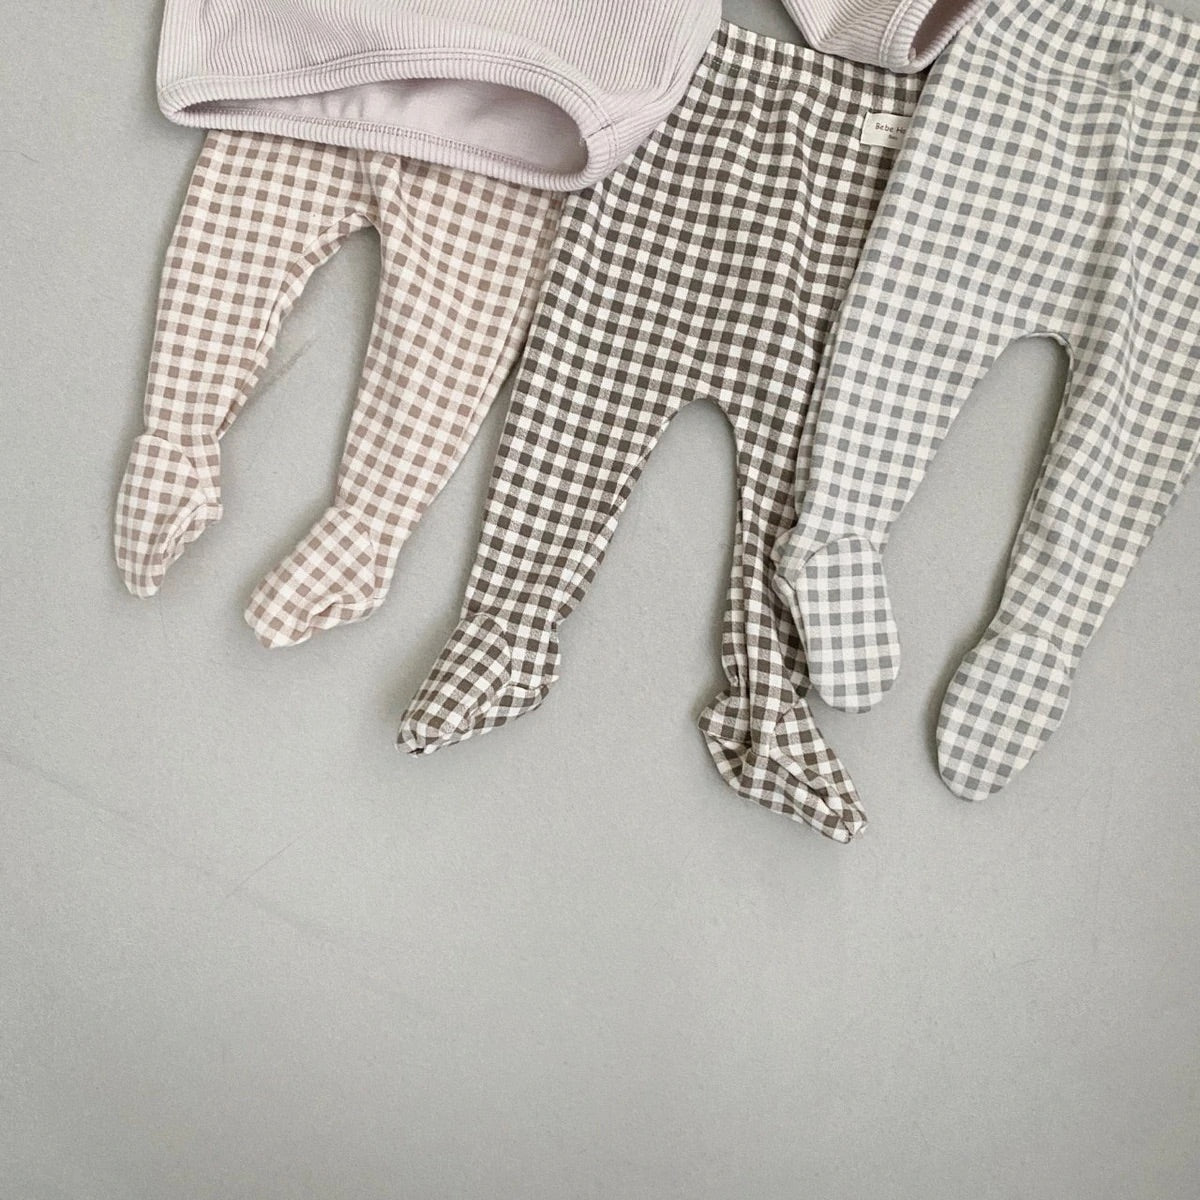 Mini Check Foot Leggings find Stylish Fashion for Little People- at Little Foxx Concept Store